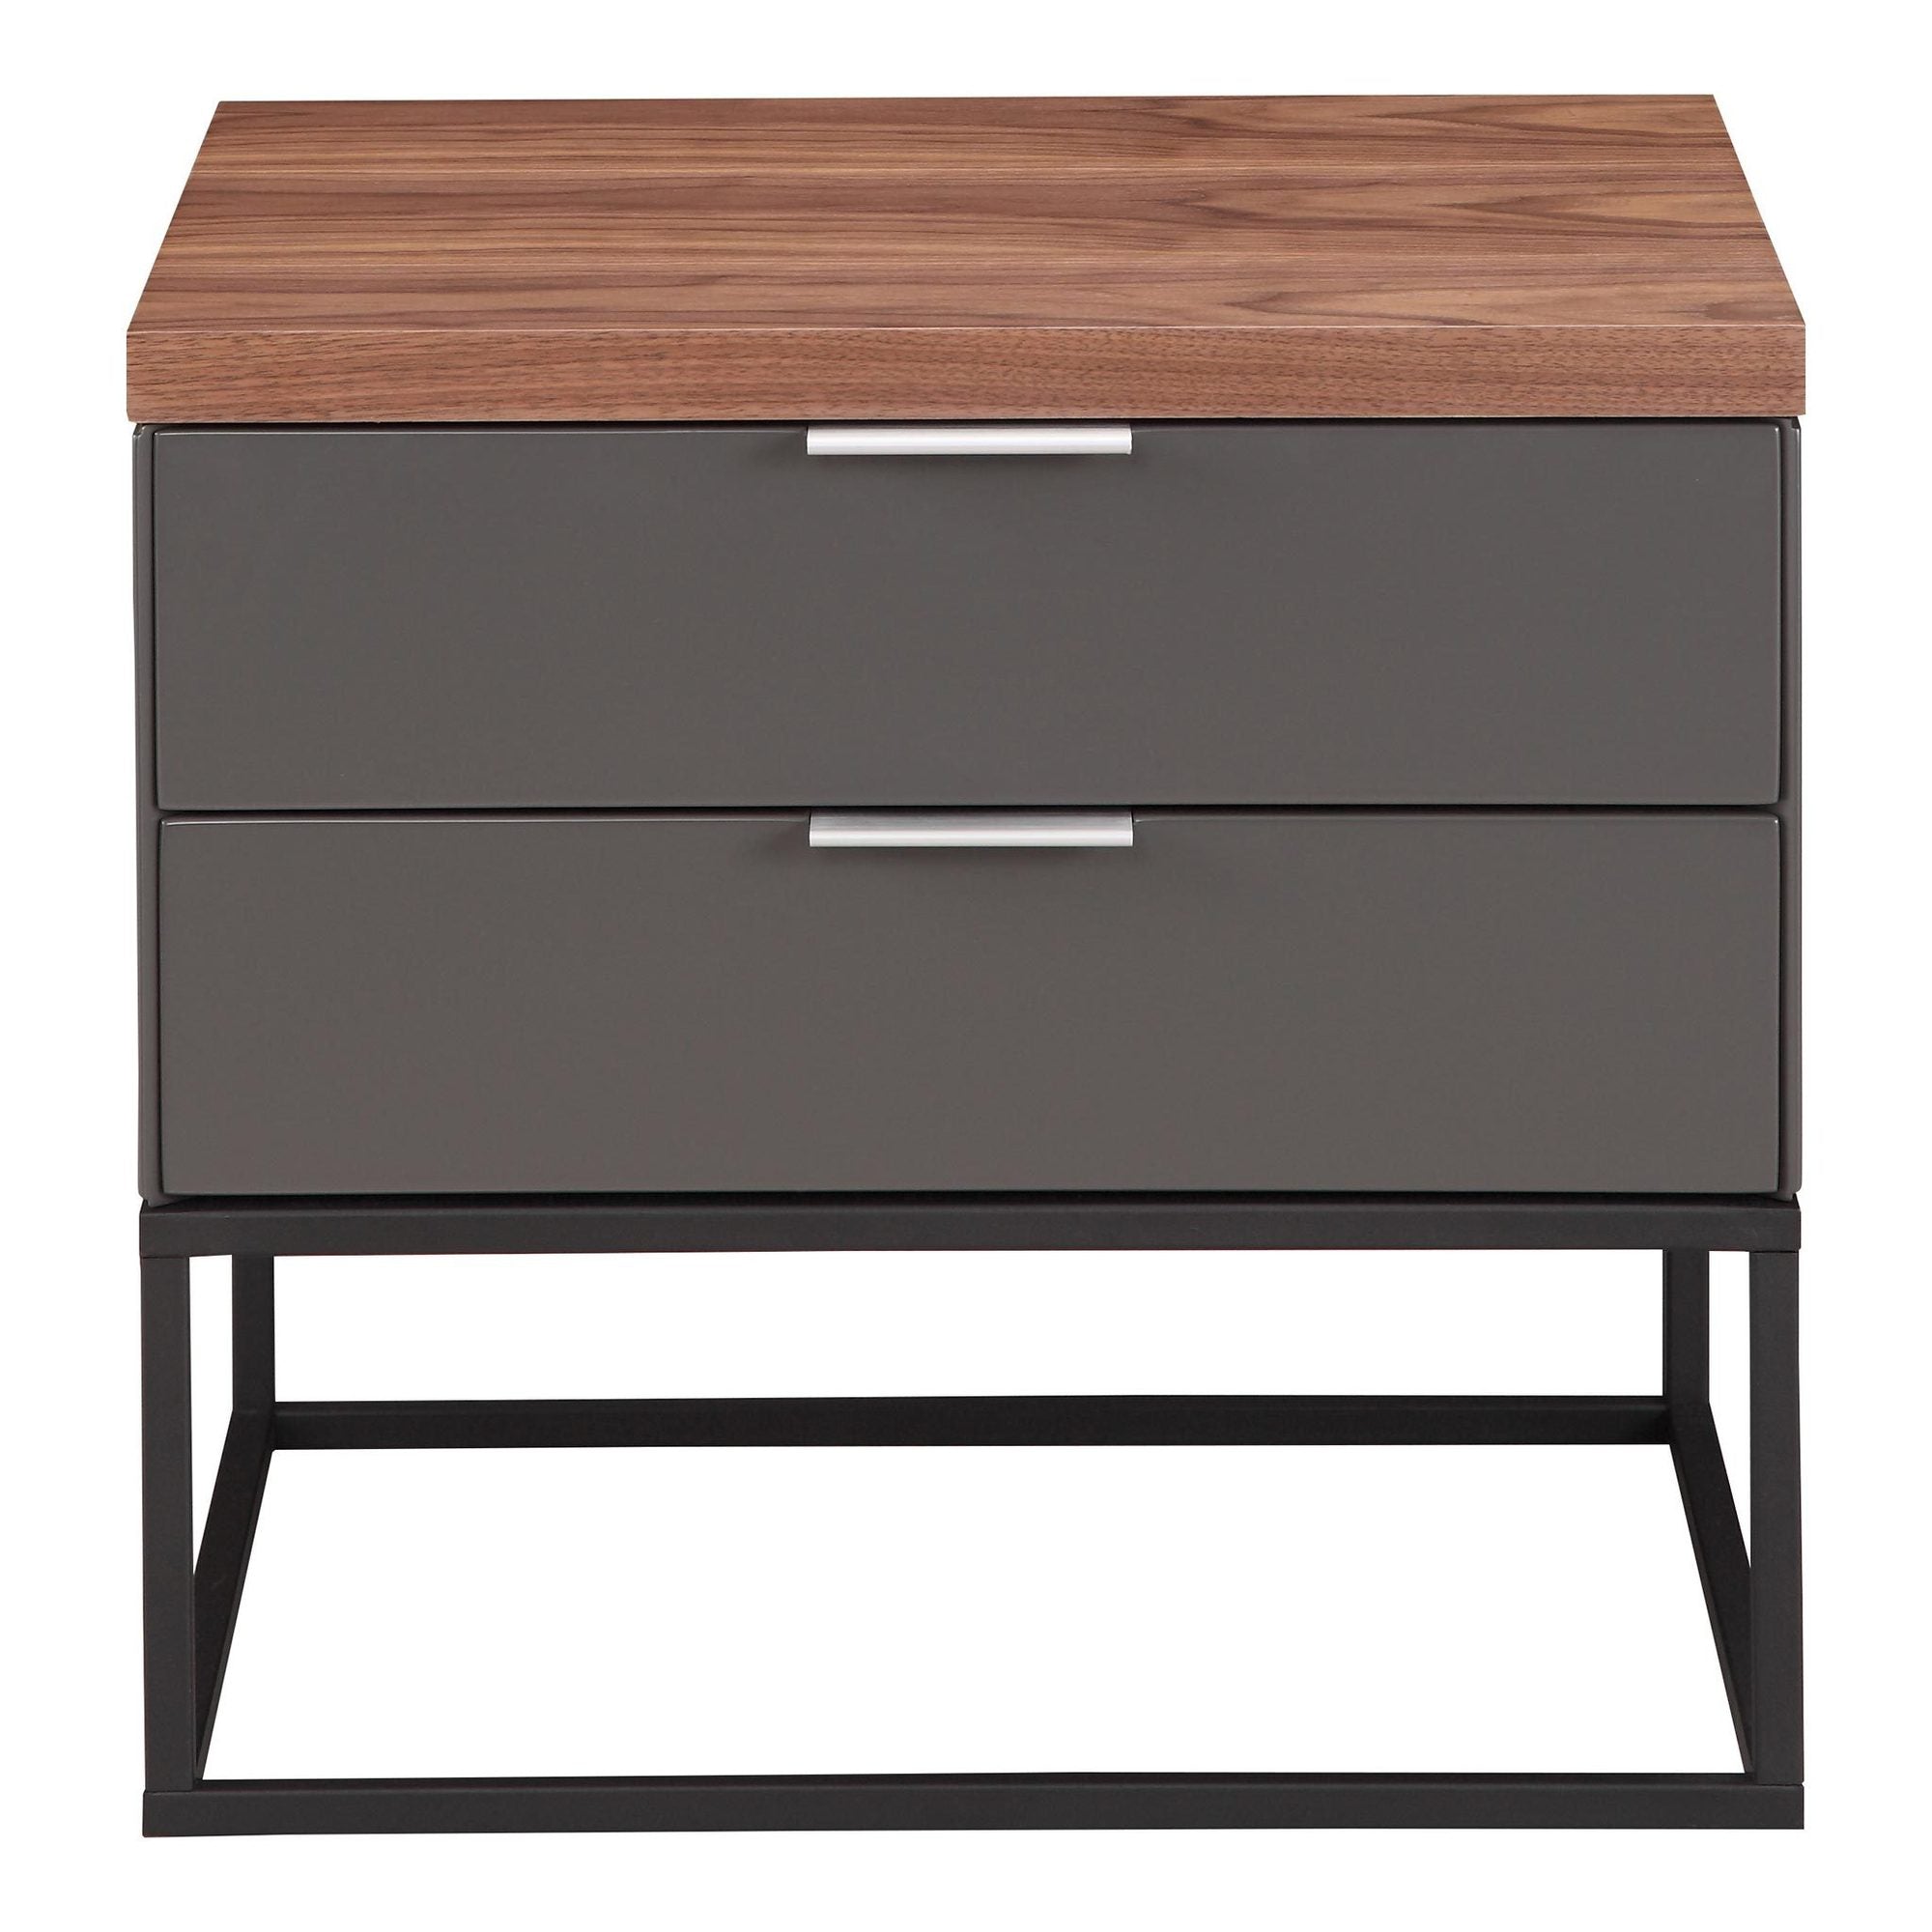 MOES-LEROY SIDE TABLE WITH DRAWERS-End/Side Tables-MODTEMPO